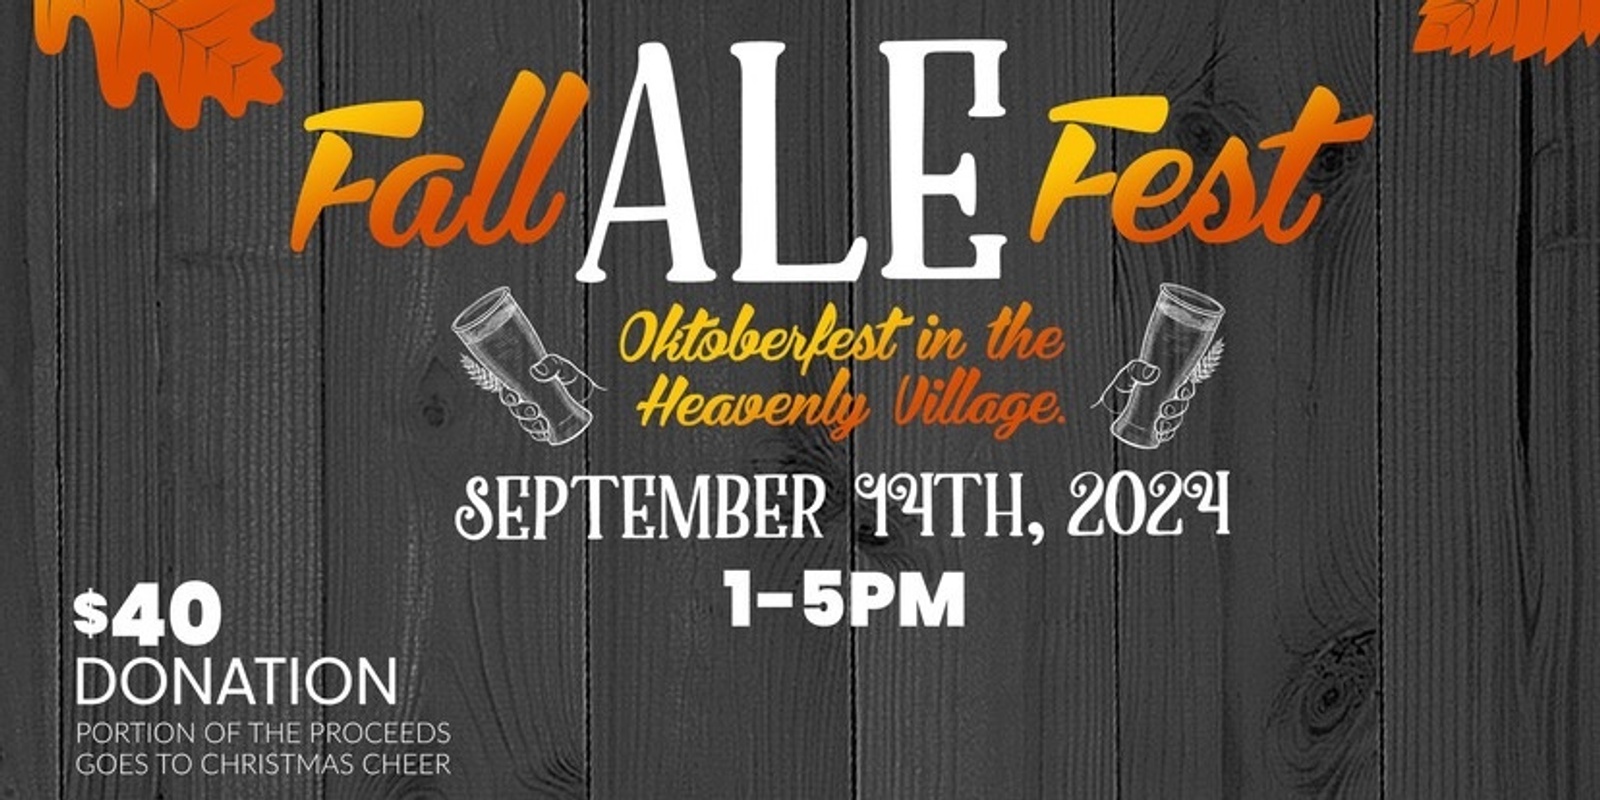 Banner image for  Fall AleFest and Chicken Wing Festival at Heavenly Village